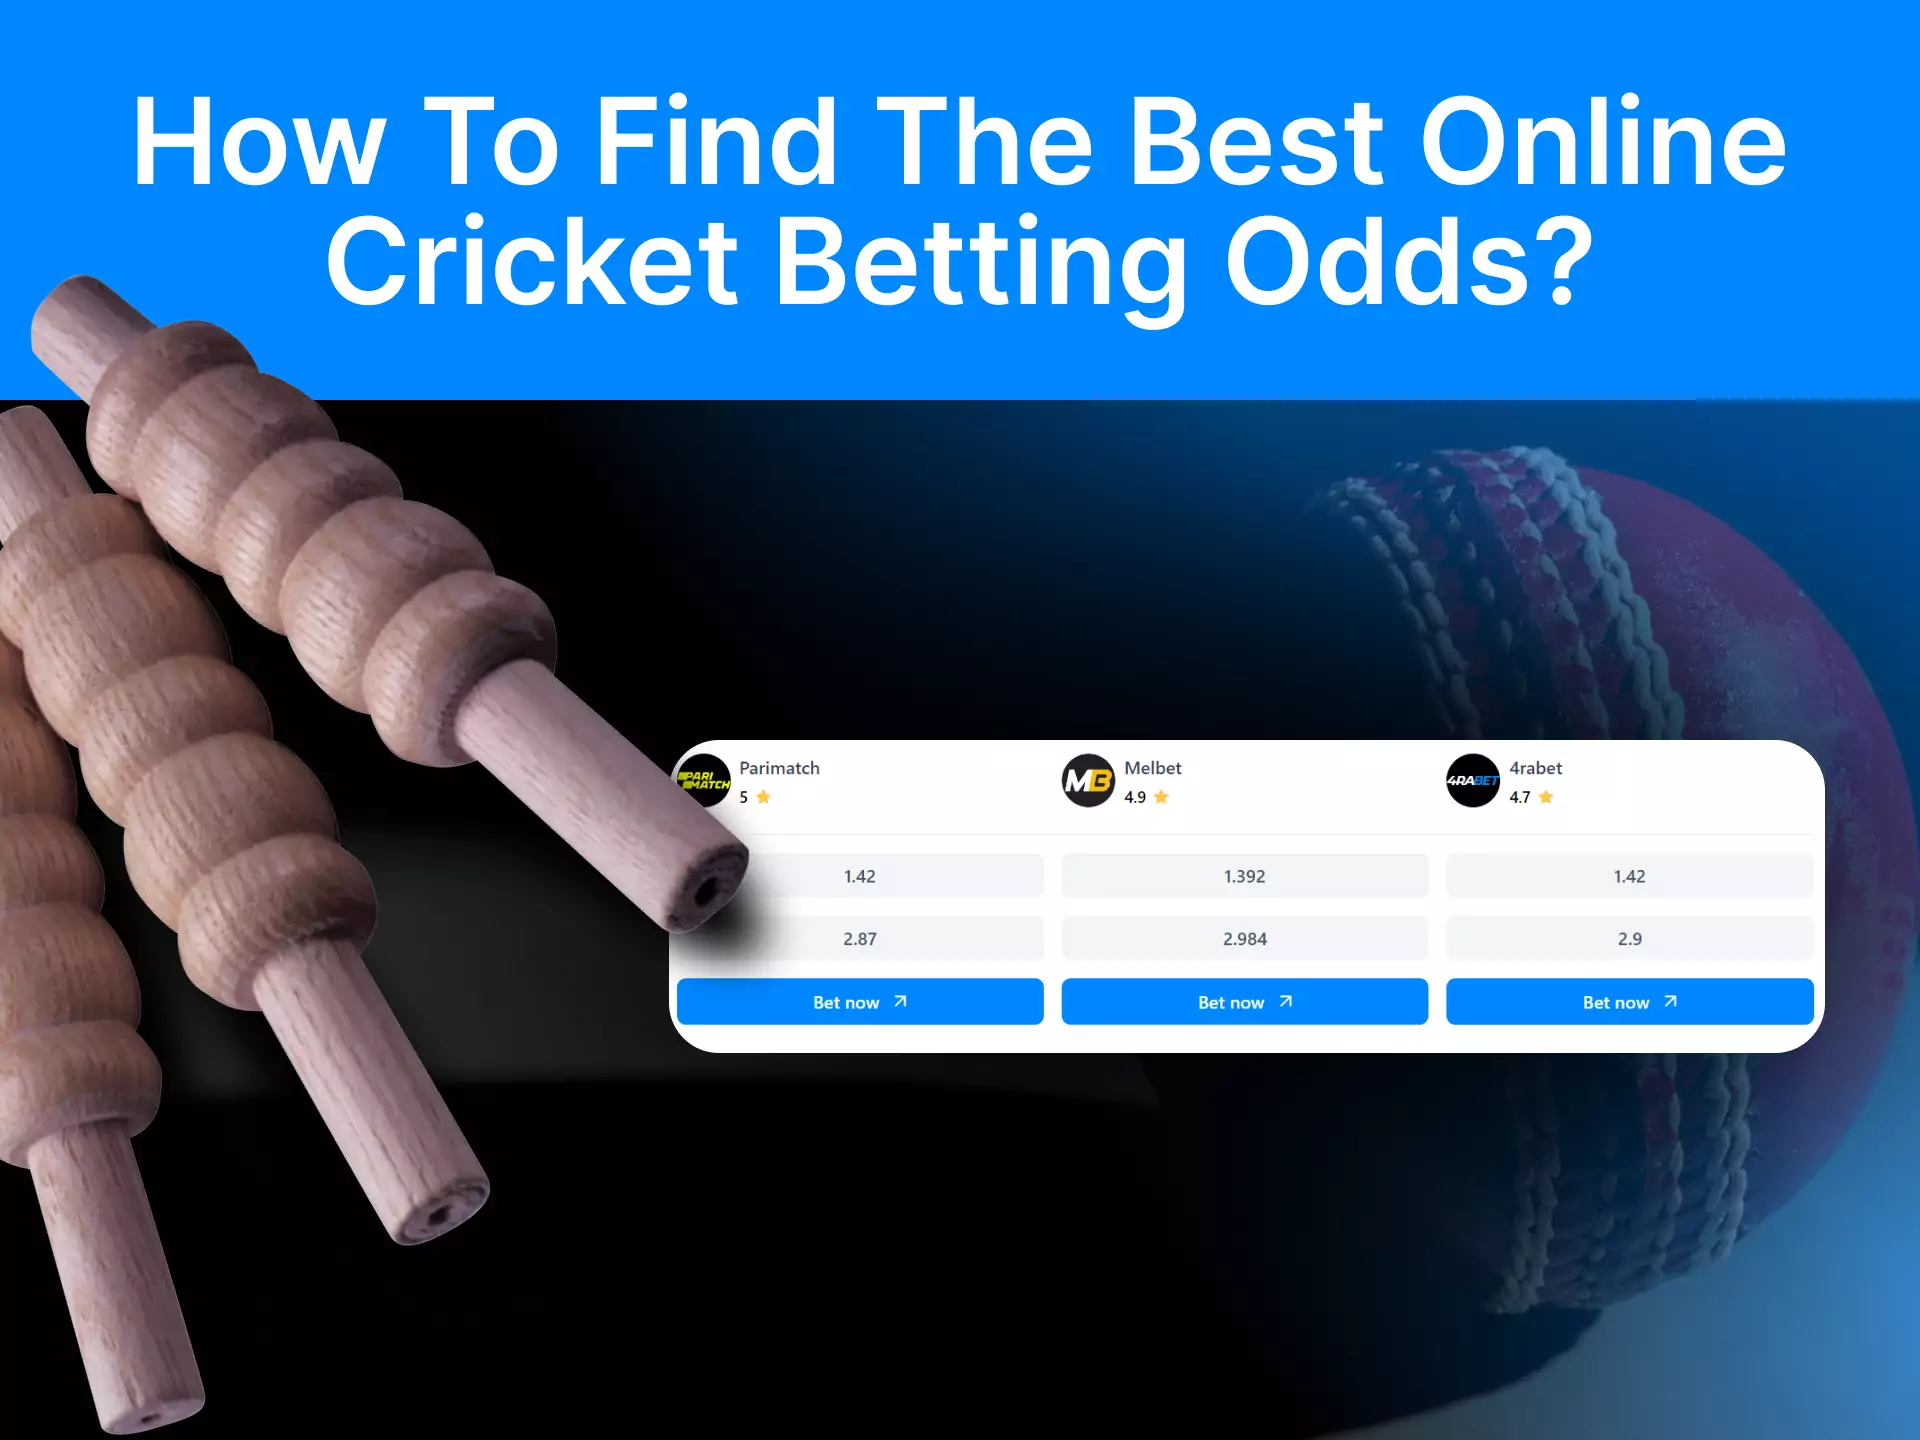 Use these tips to find the best site to place your bet with the best odds.